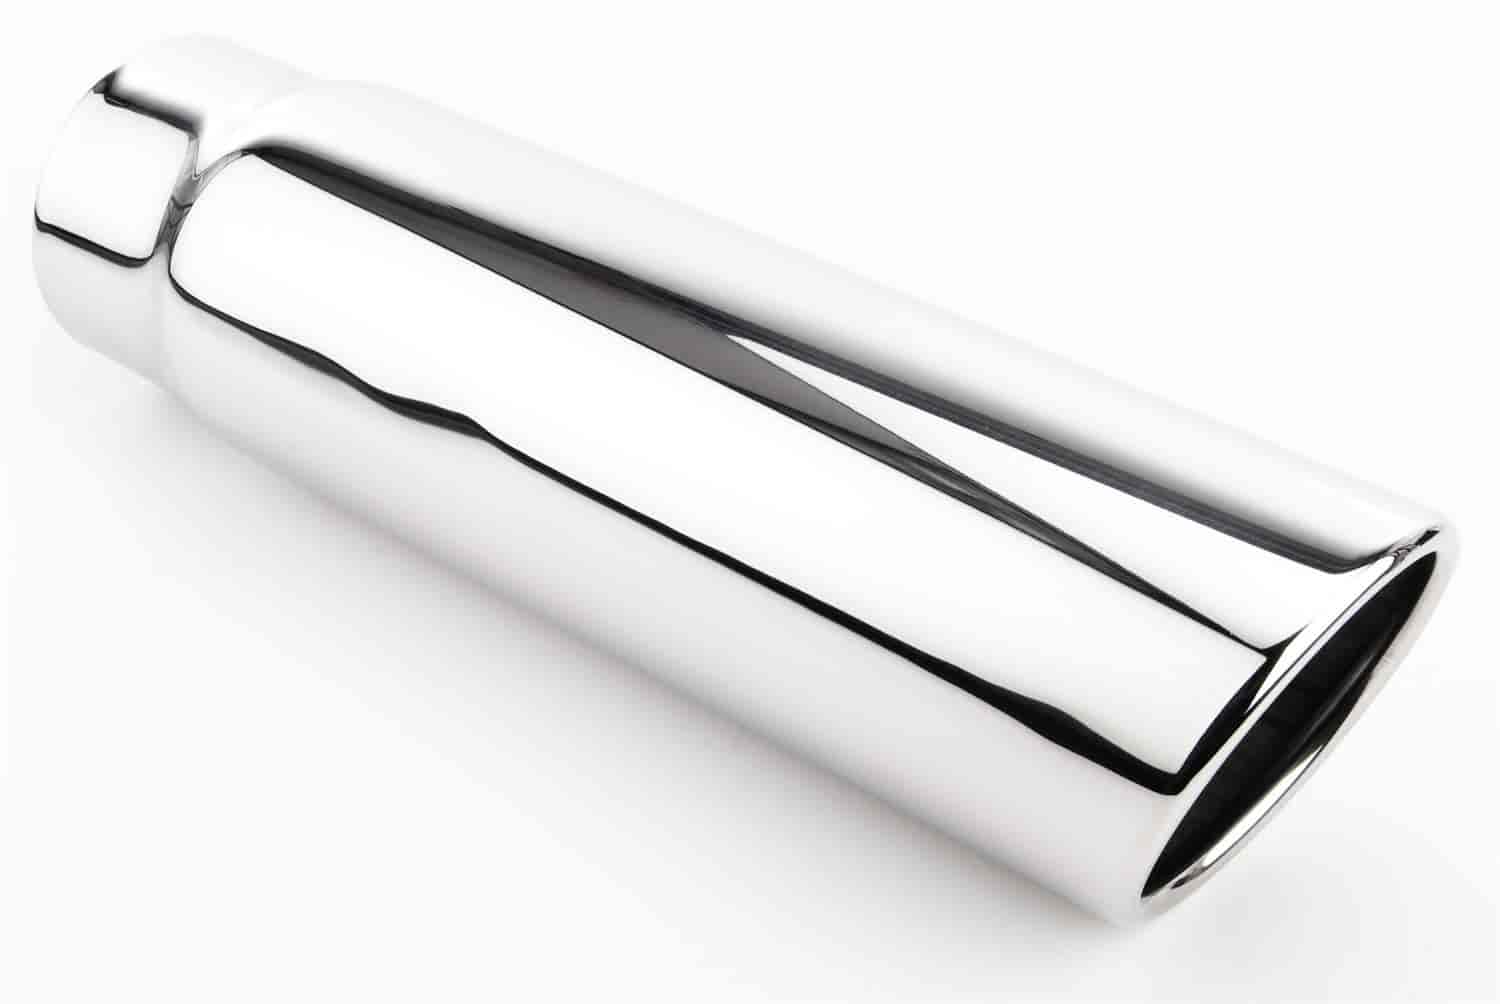 Stainless Exhaust Tip Overall Length: 12 in. Weld-On